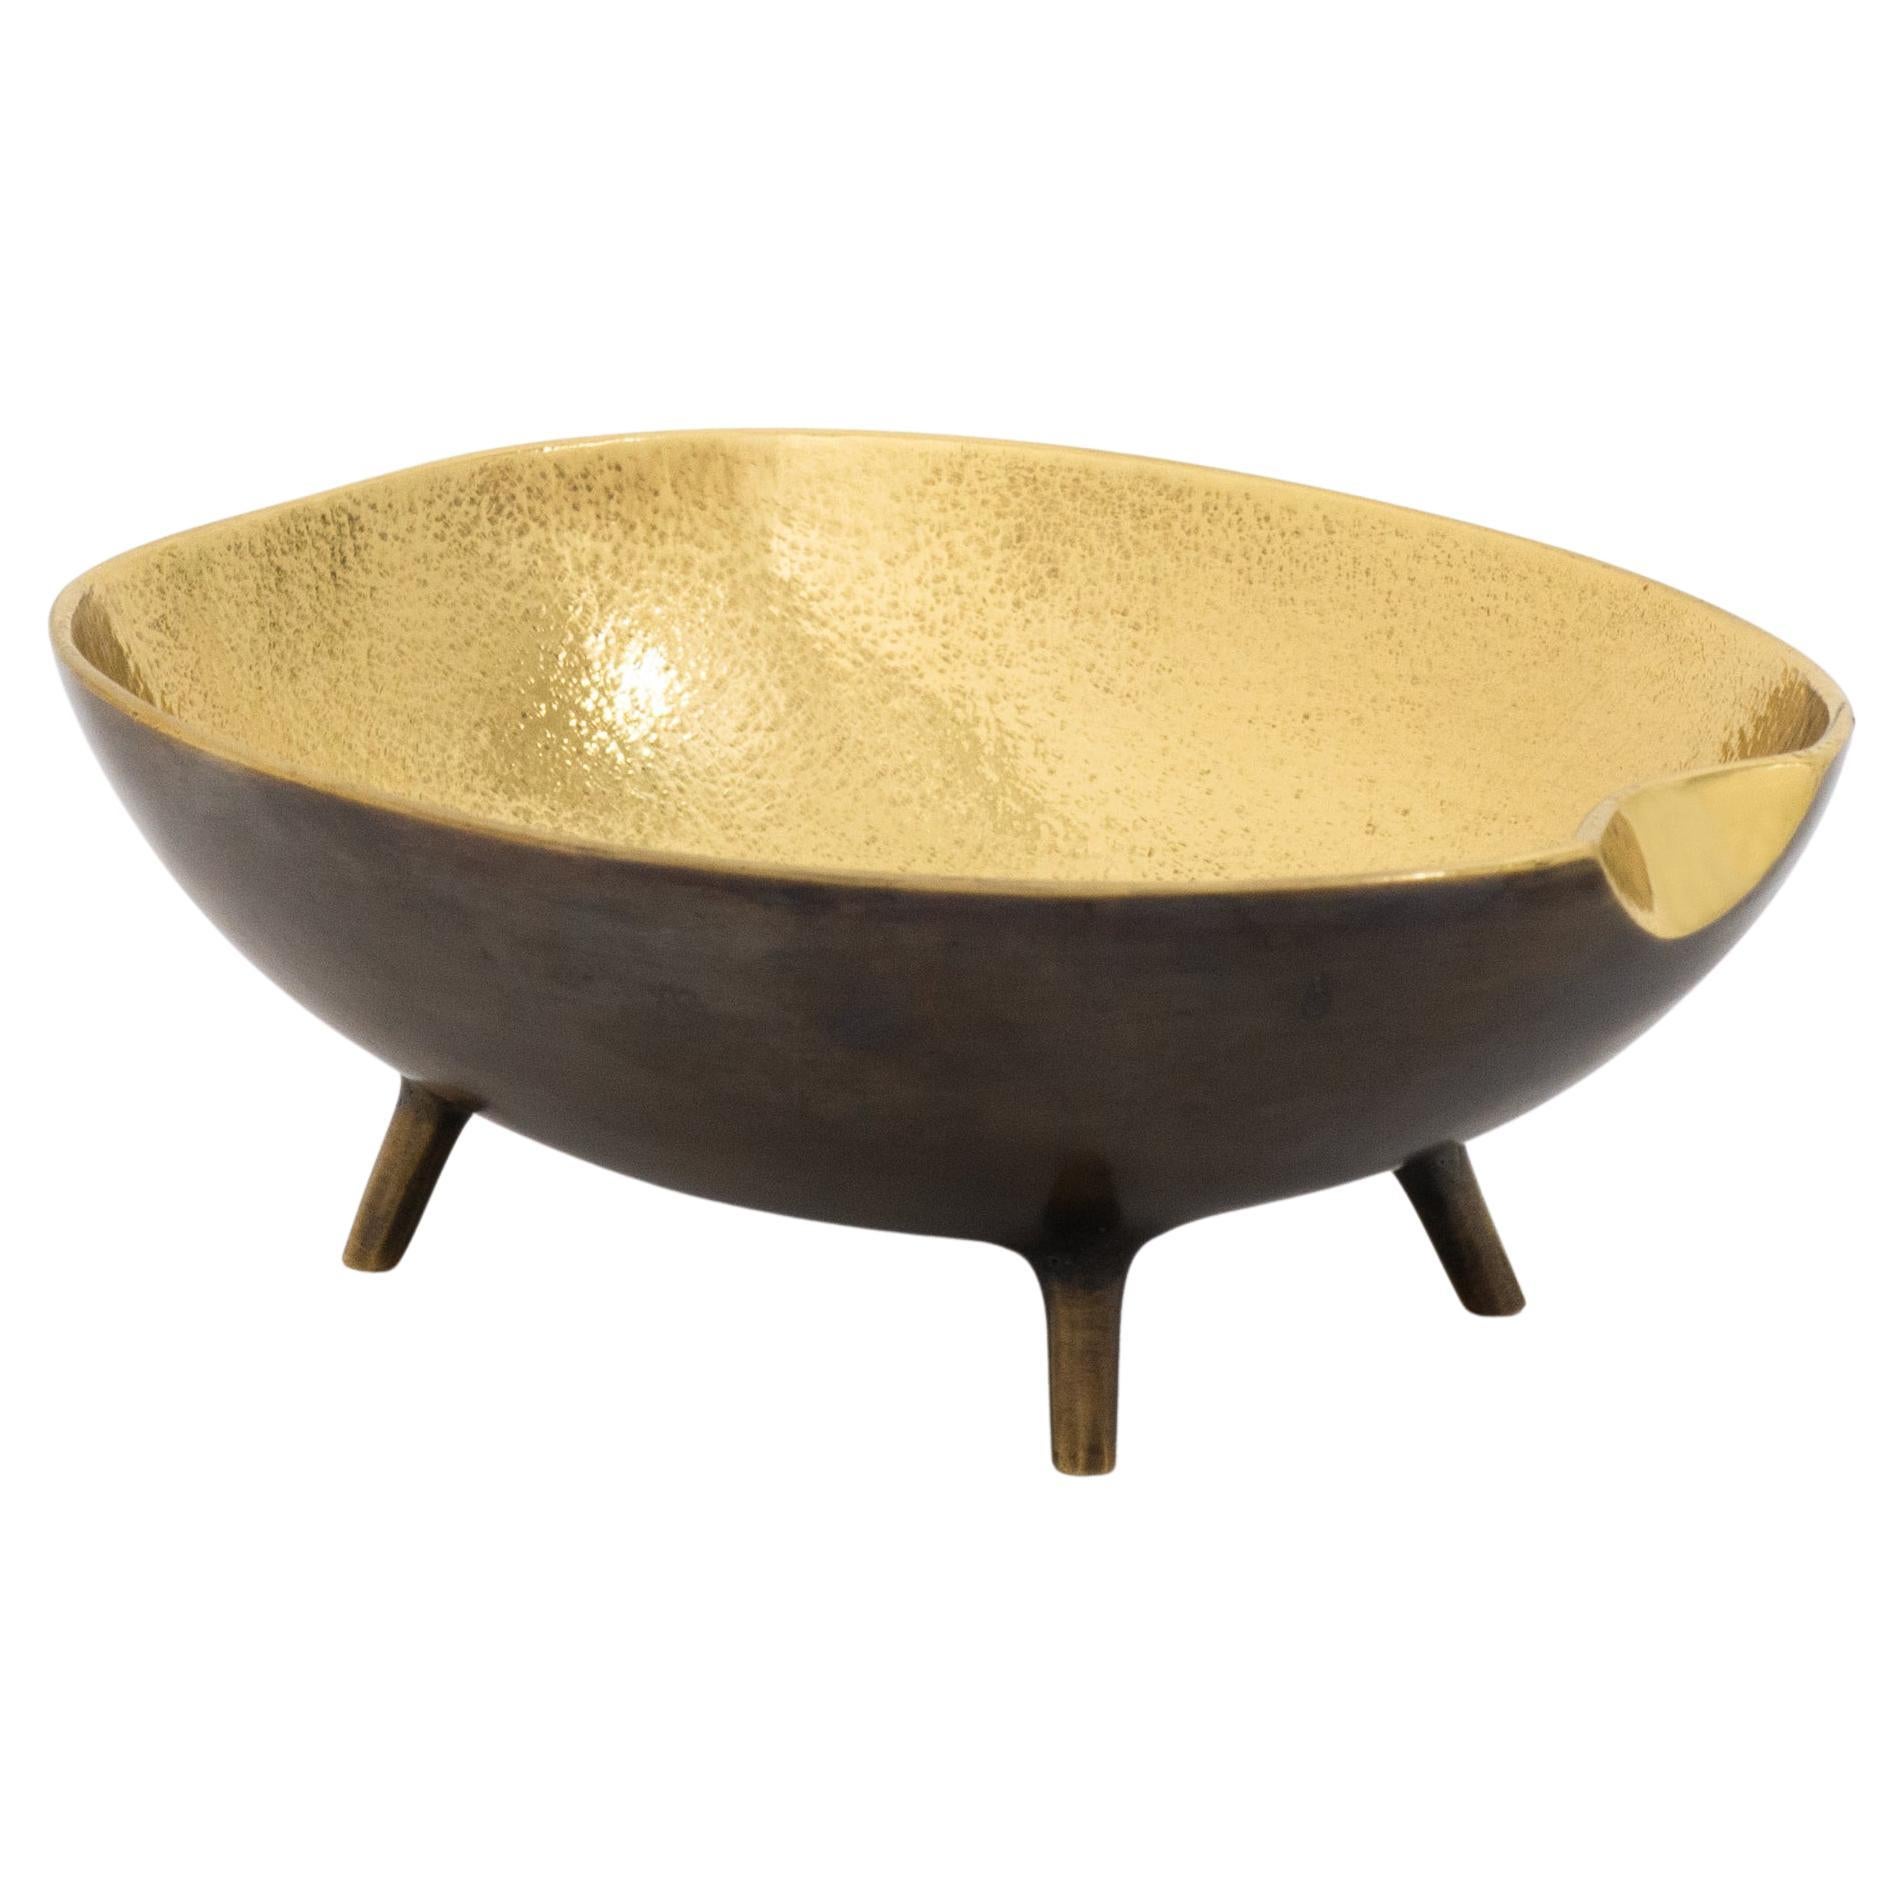 Cast Brass Decorative Bowl with Legs, Vide-poche, with Bronze Patina